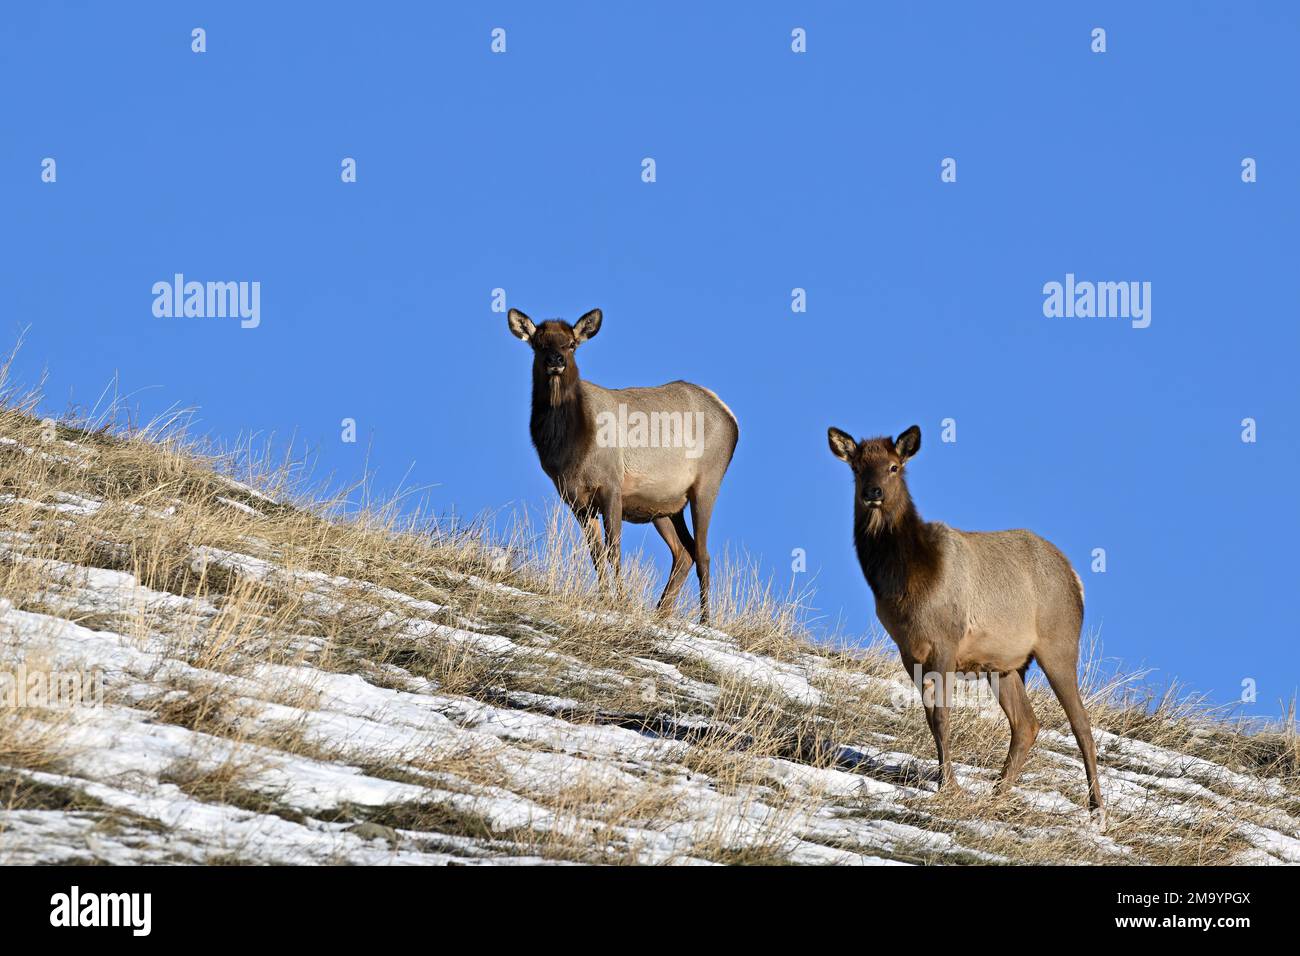 Two female elk "Cervus elaphus", standing on a hill top against a blue sky in rural Alberta Canada. Stock Photo